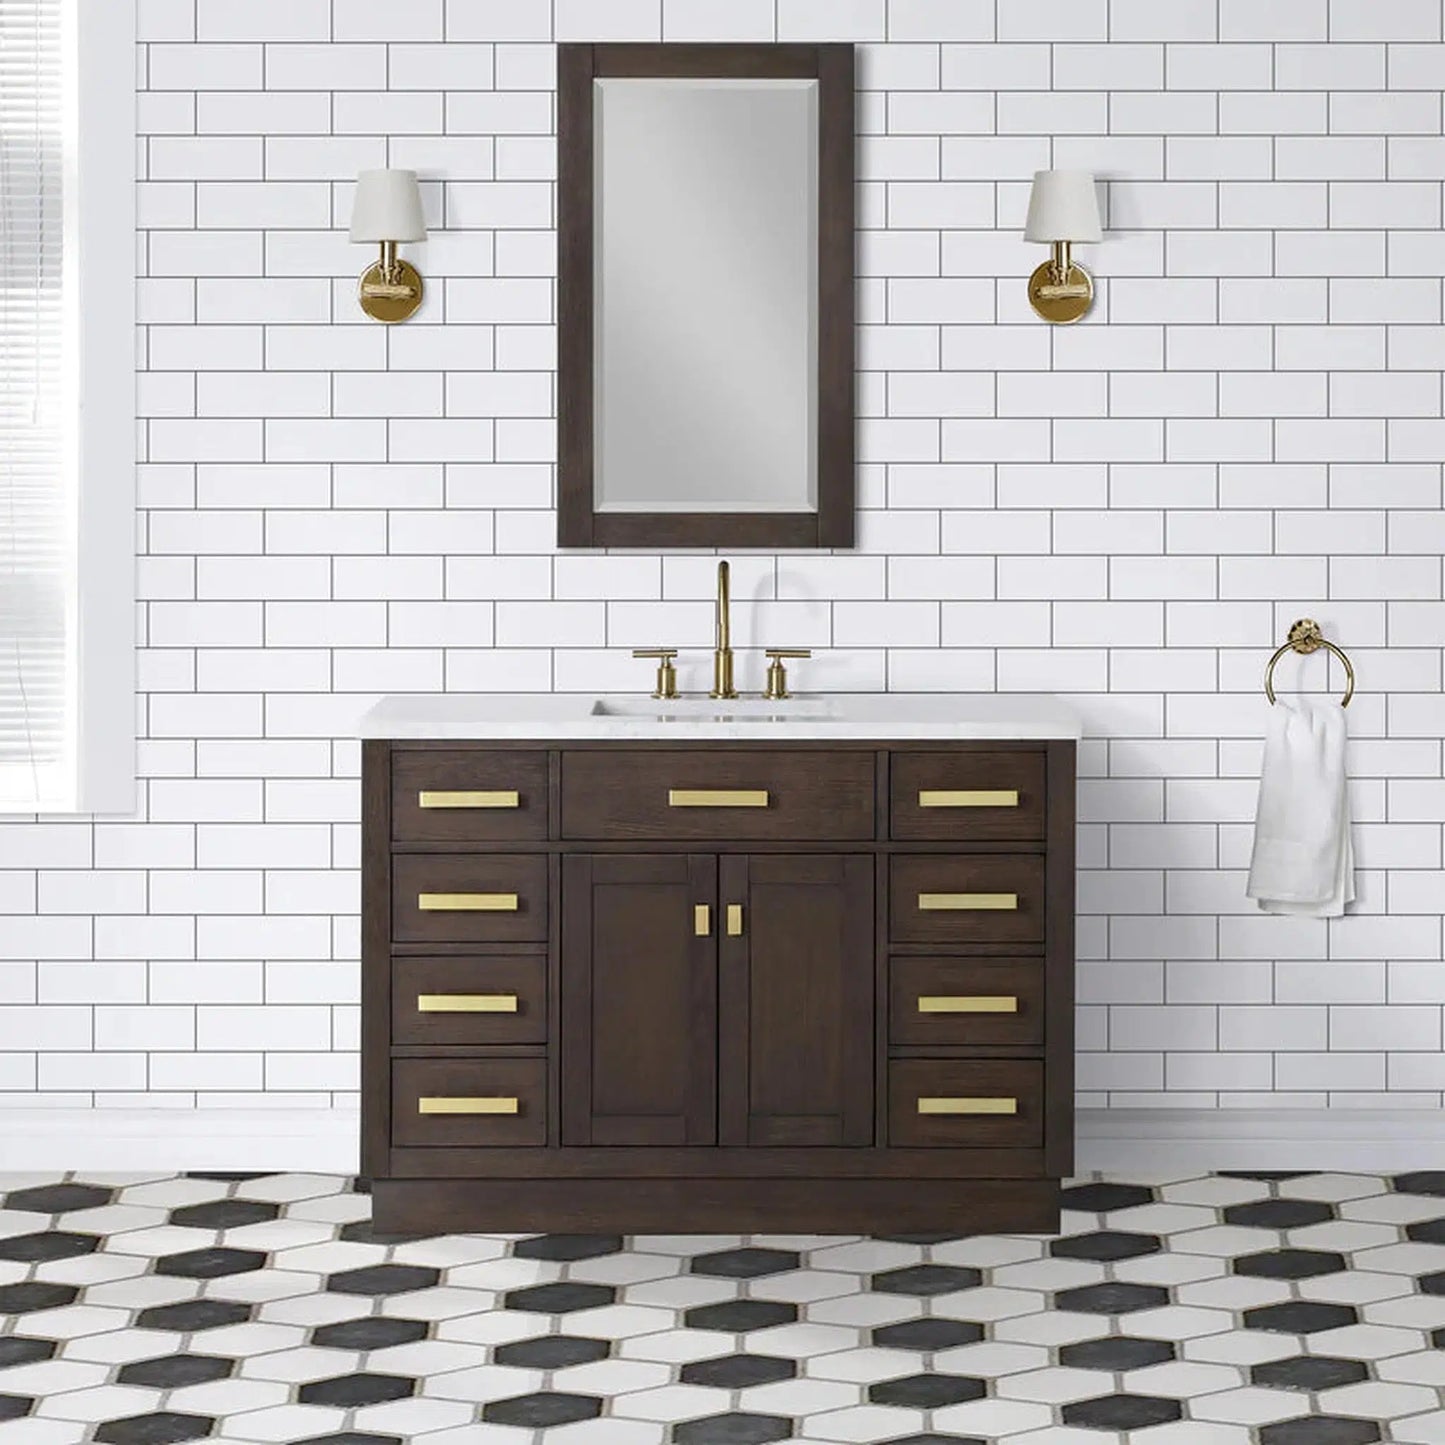 Water Creation Chestnut 48" Single Sink Carrara White Marble Countertop Vanity In Brown Oak with Grooseneck Faucet and Mirror